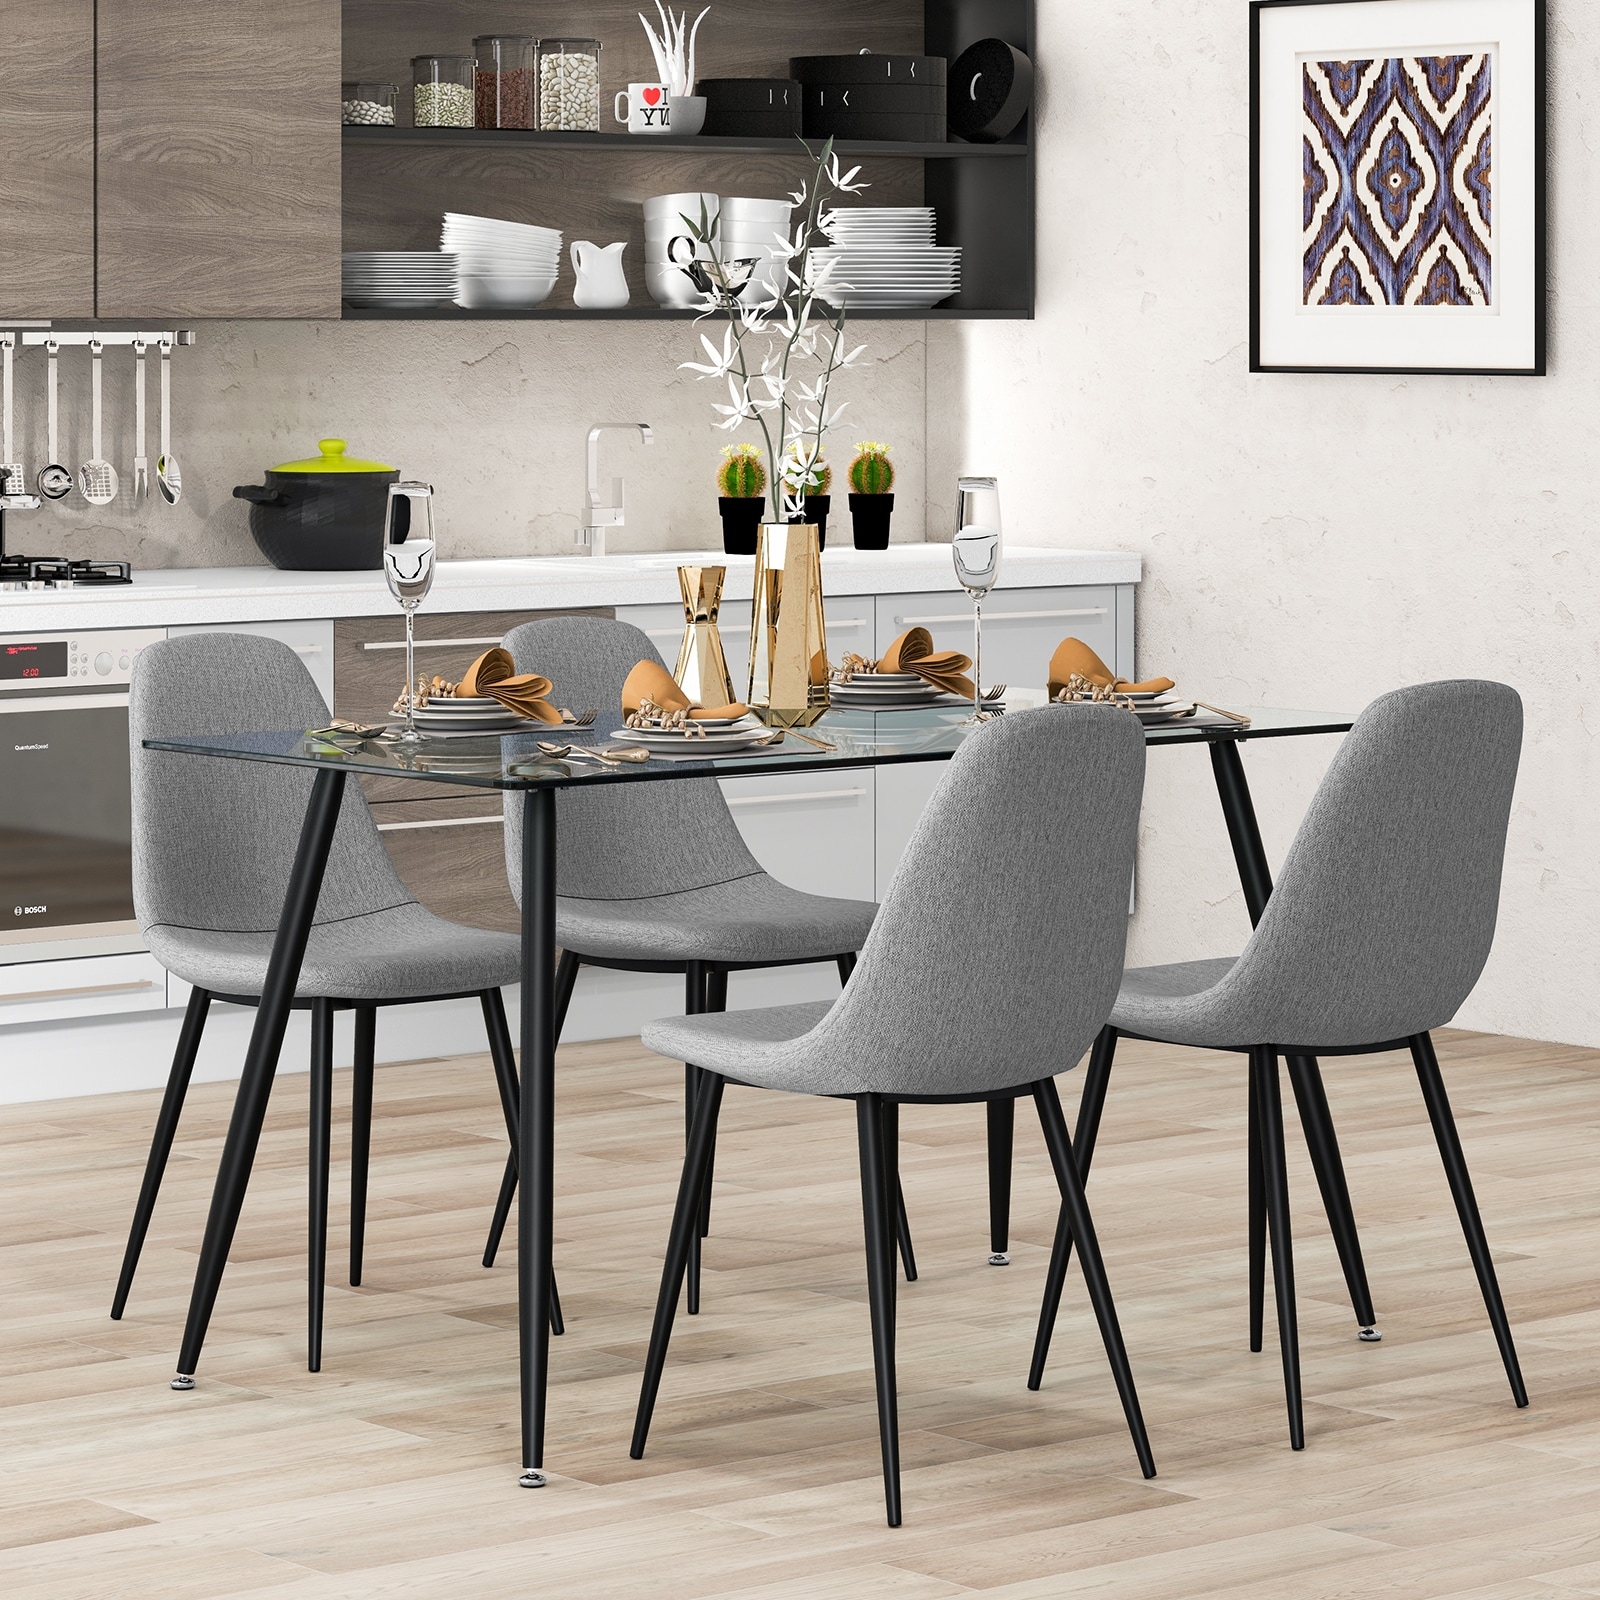 https://ak1.ostkcdn.com/images/products/is/images/direct/3ef94e24e8caf7dfe0cc42157a20ed1f022056cd/Modern-Glass-Rectangular-Dining-Table-with-Metal-Legs.jpg